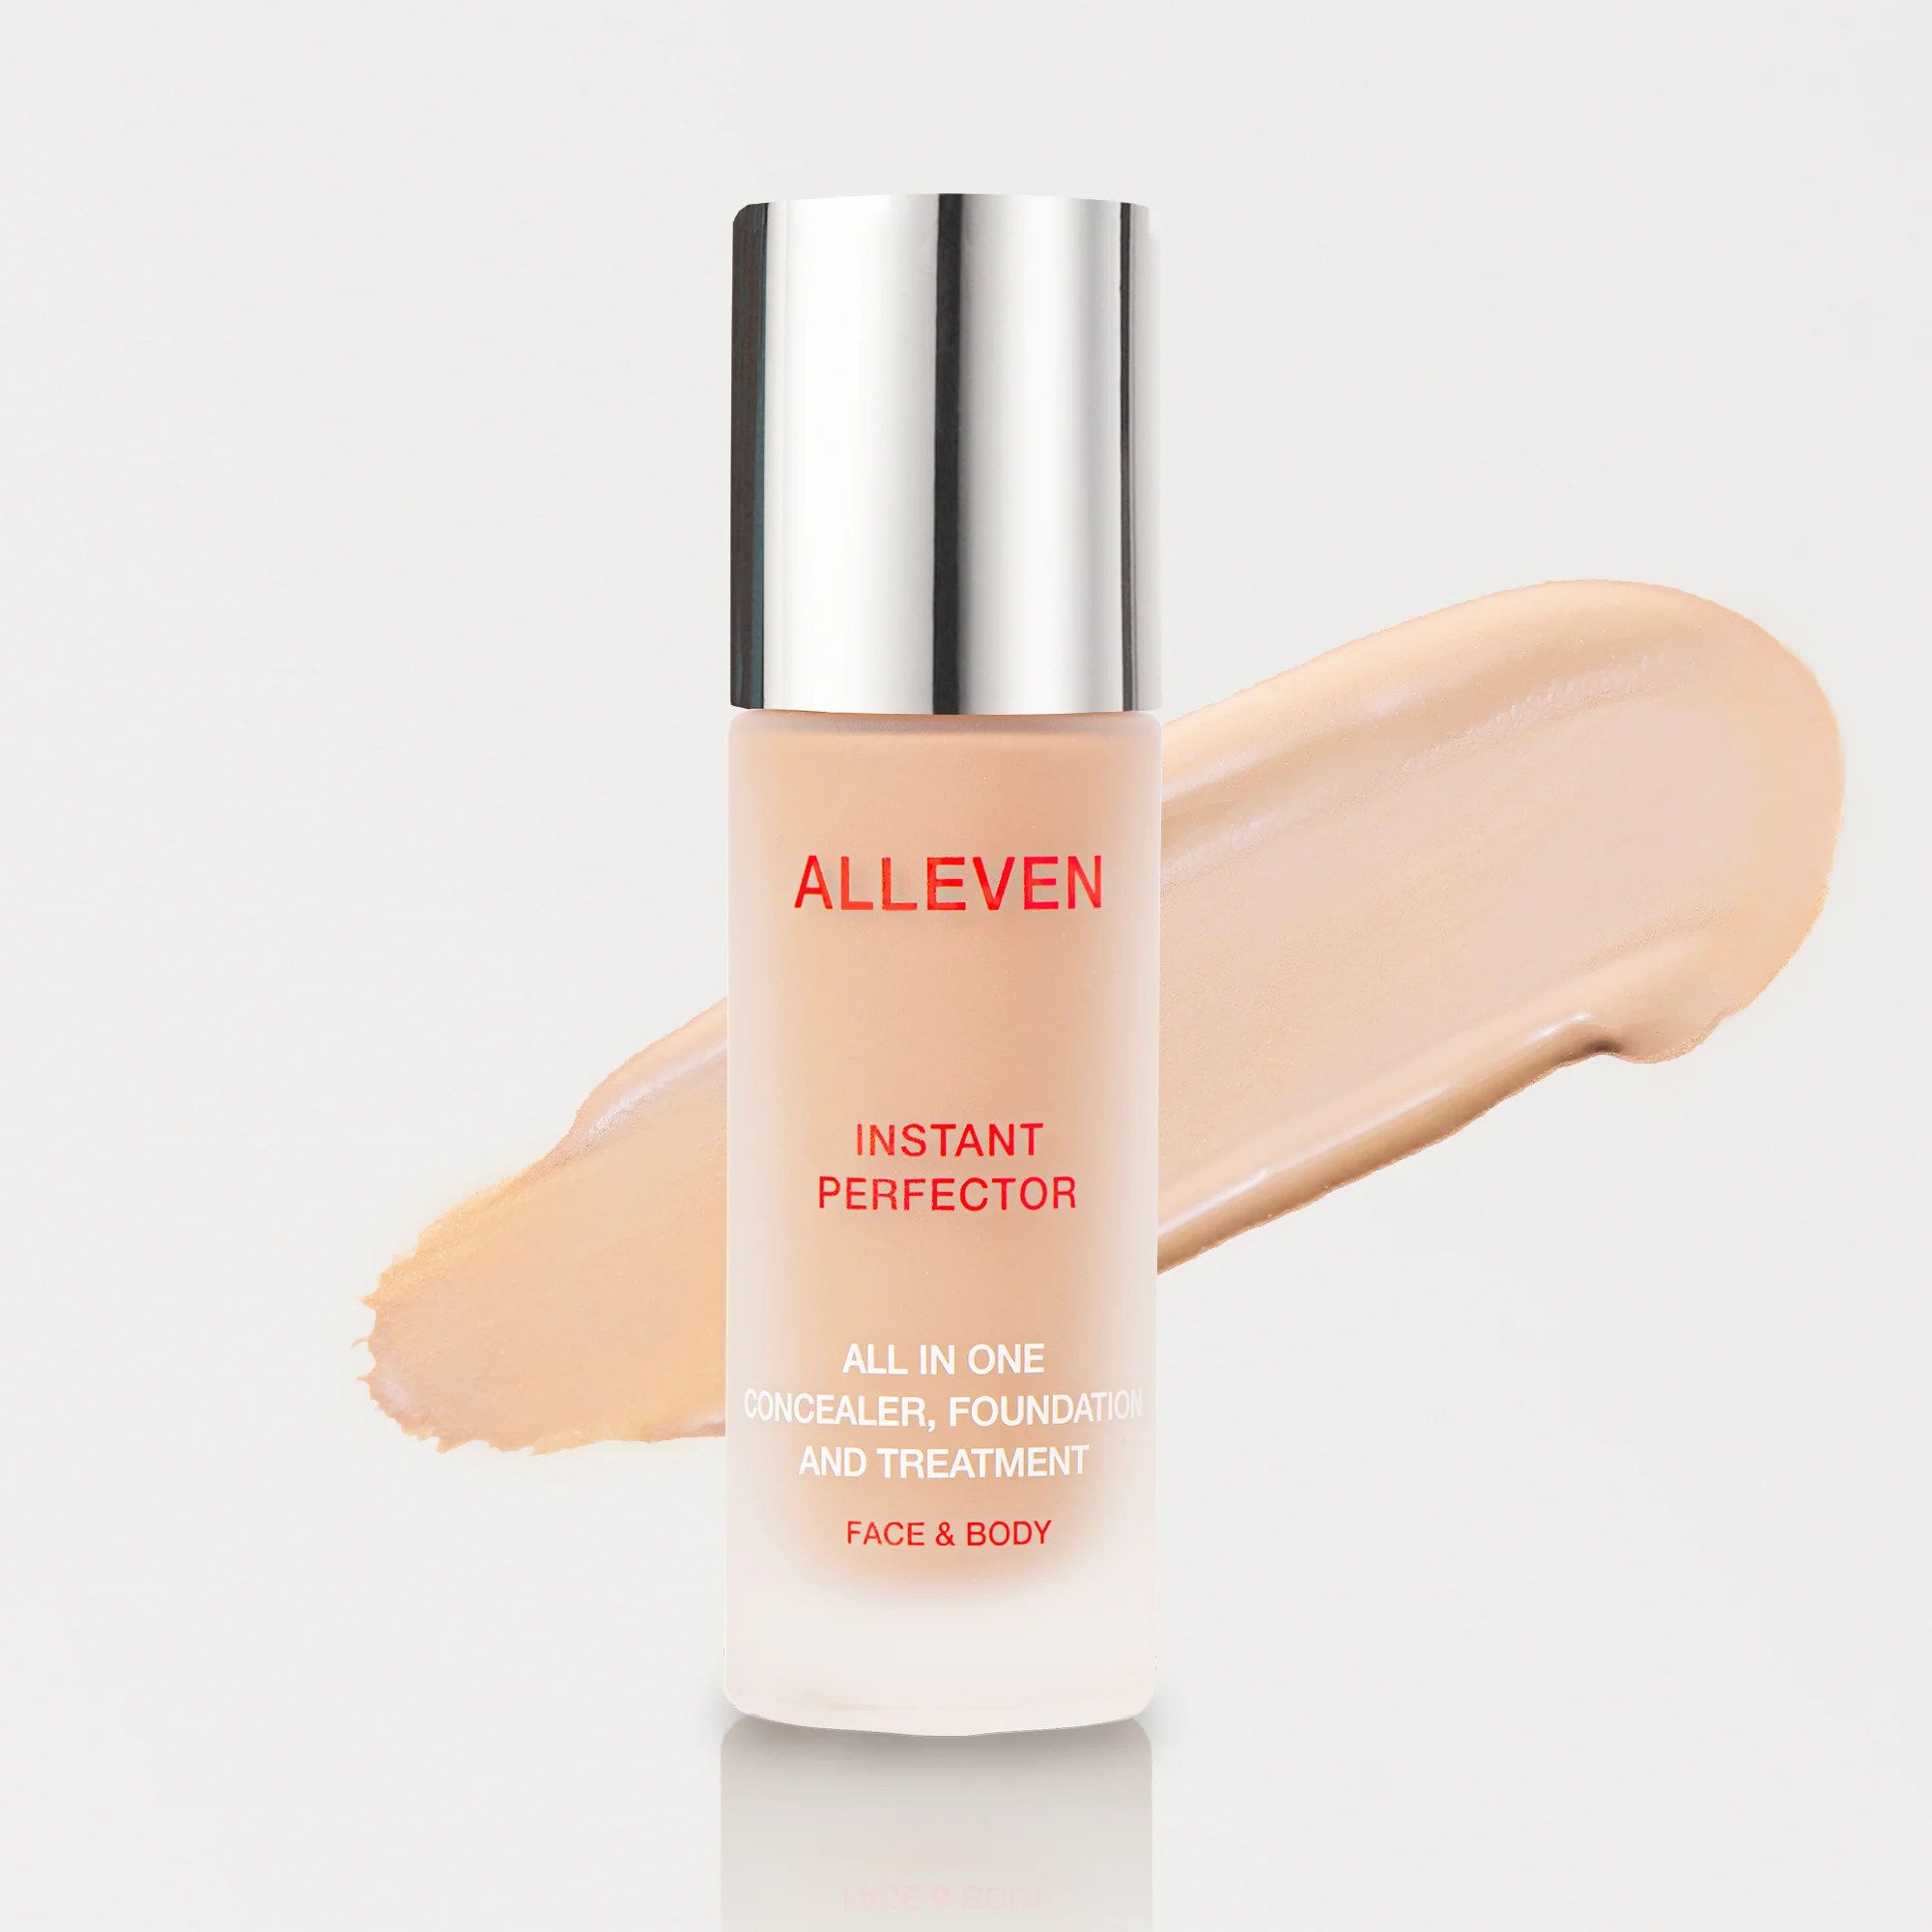 This ‘Instant Perfector’ Replaces My Foundation and Concealer And Fades My Dark Spots While I Wear It